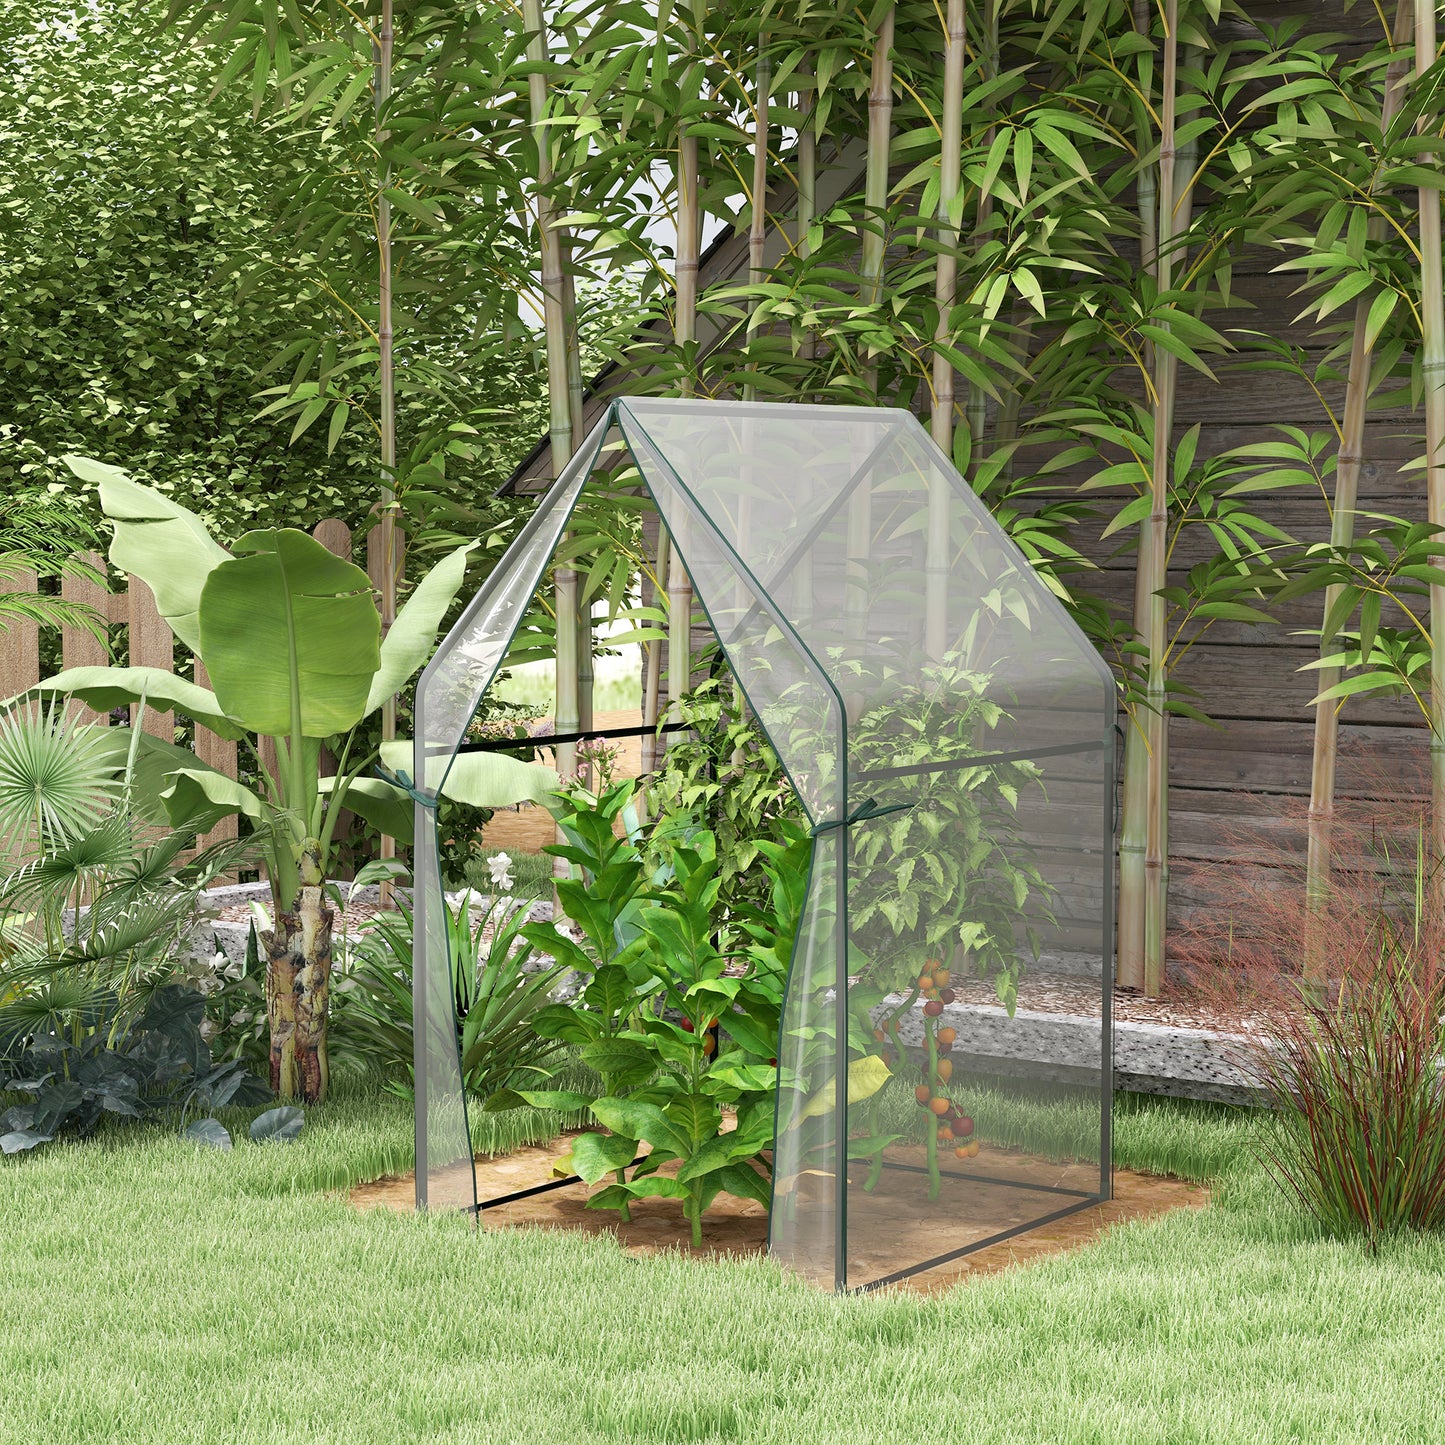 Outsunny Portable Greenhouse: Compact Garden Growhouse with Dual Zipped Doors, Indoor Outdoor Plant Protection, 90 x 90 x 145cm, Clear